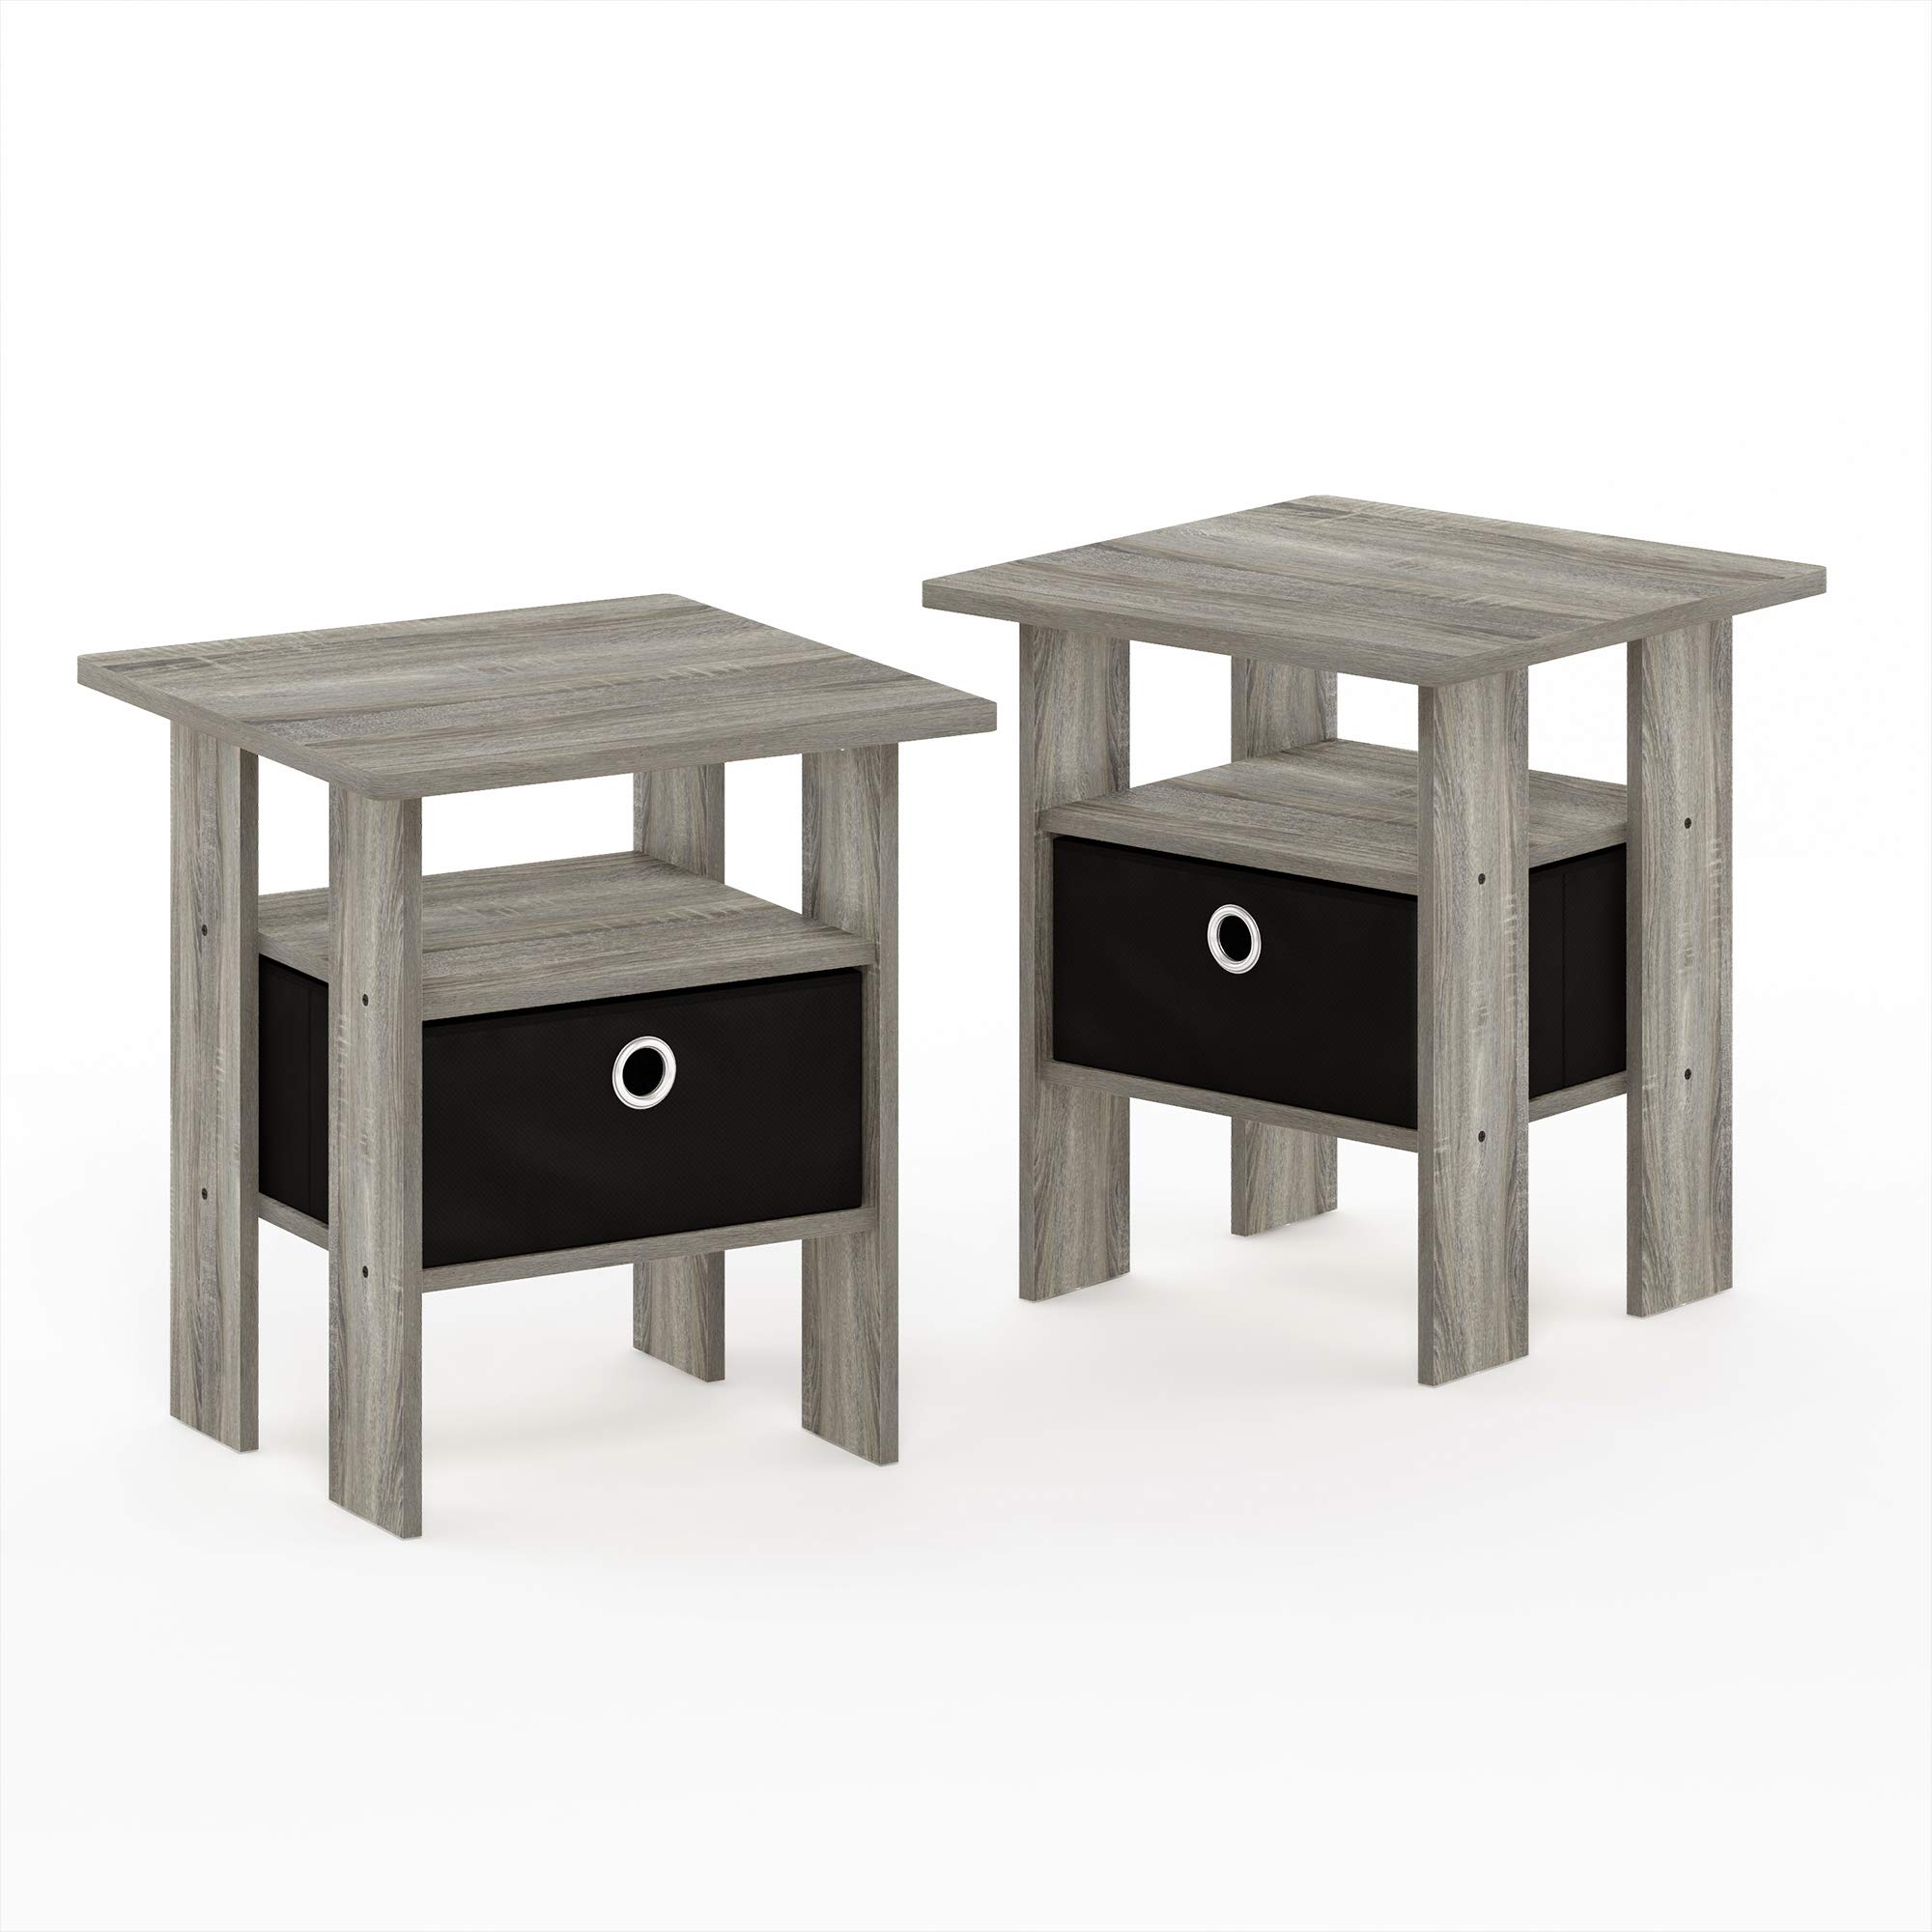 2-Count Furinno Andrey Night Stand Bedside Table w/ Bin Drawer (French Oak Grey) $26.10 + Free Shipping w/ Prime or on $35+